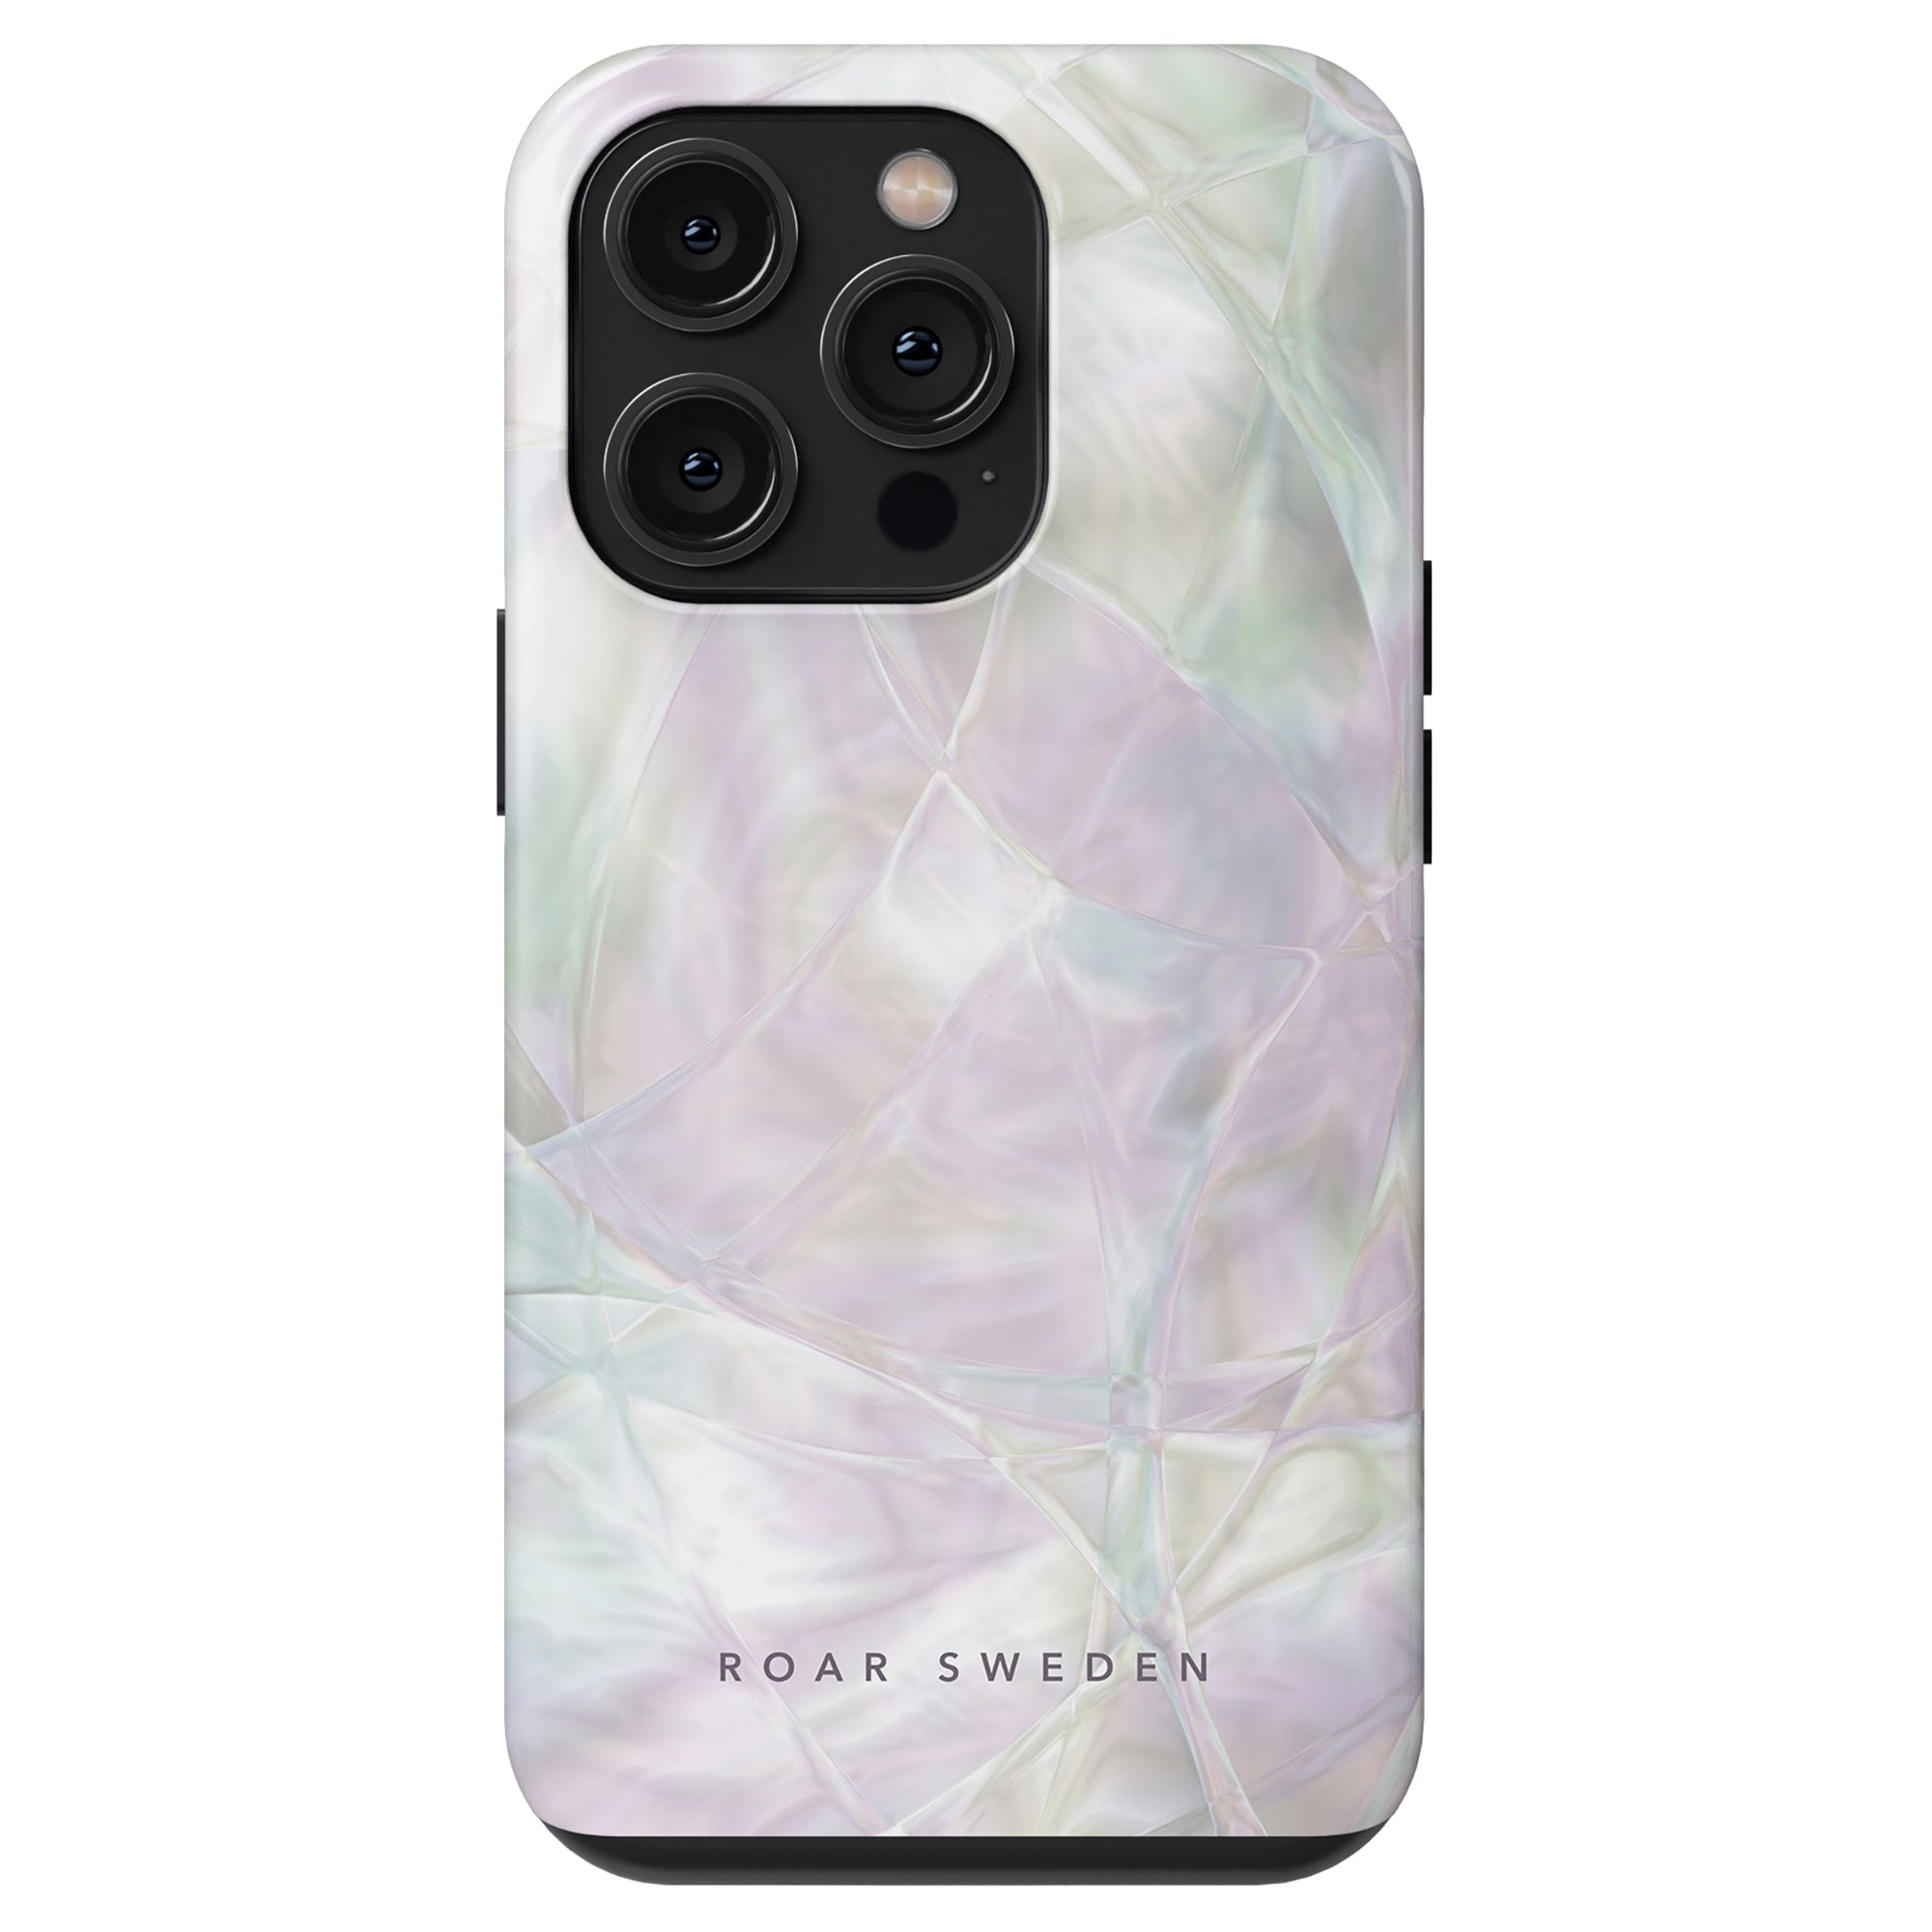 A Mauve - Tough Case from the Oyster Collection, with a shimmering, iridescent design and a label saying "roar sweden", showcasing three camera cutouts.